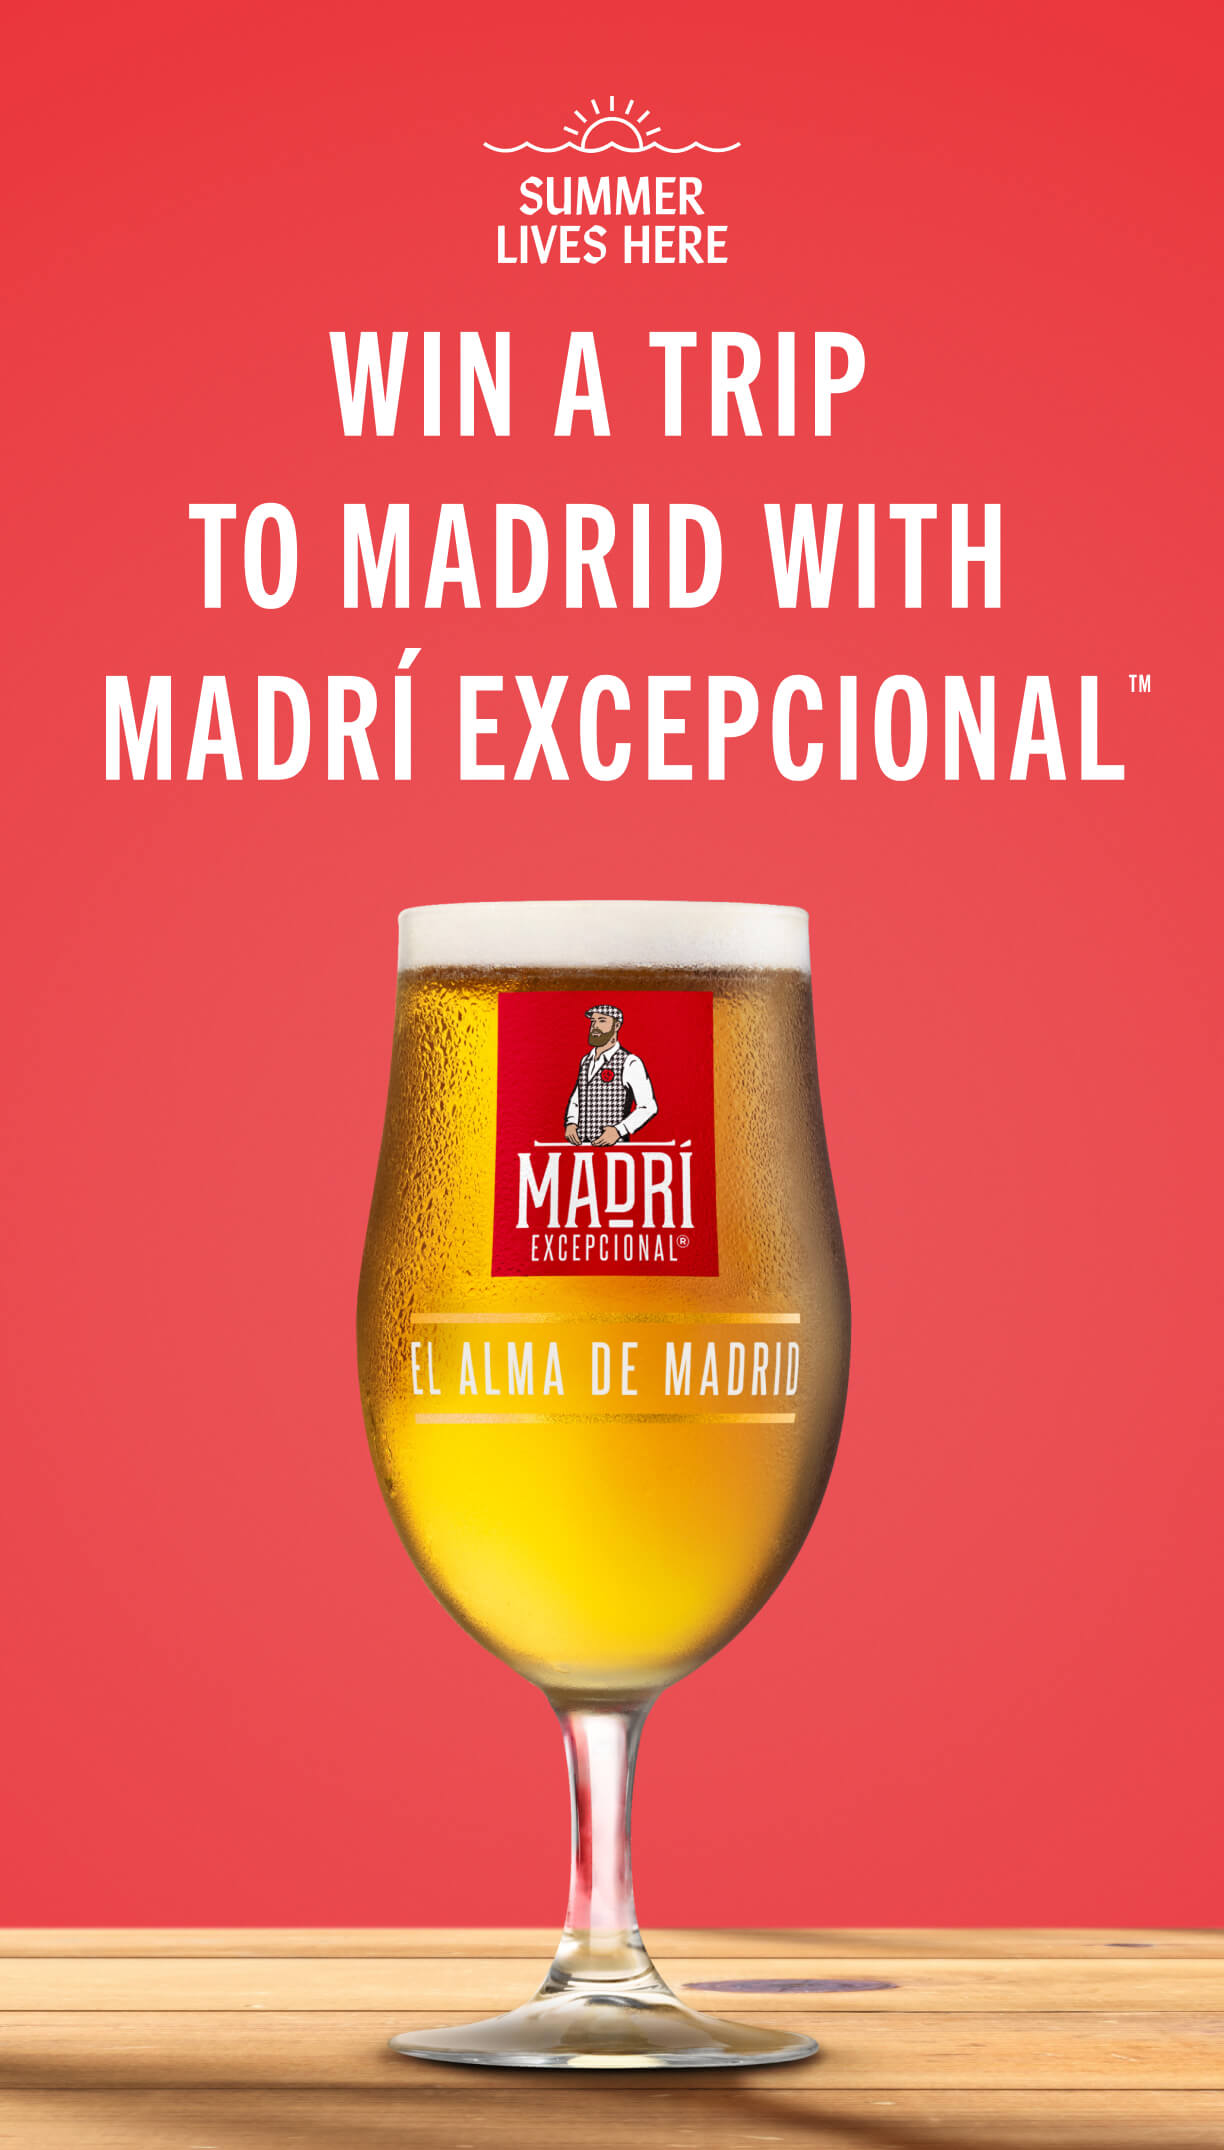 Win a trip to Madrid with Madrí Excepcional